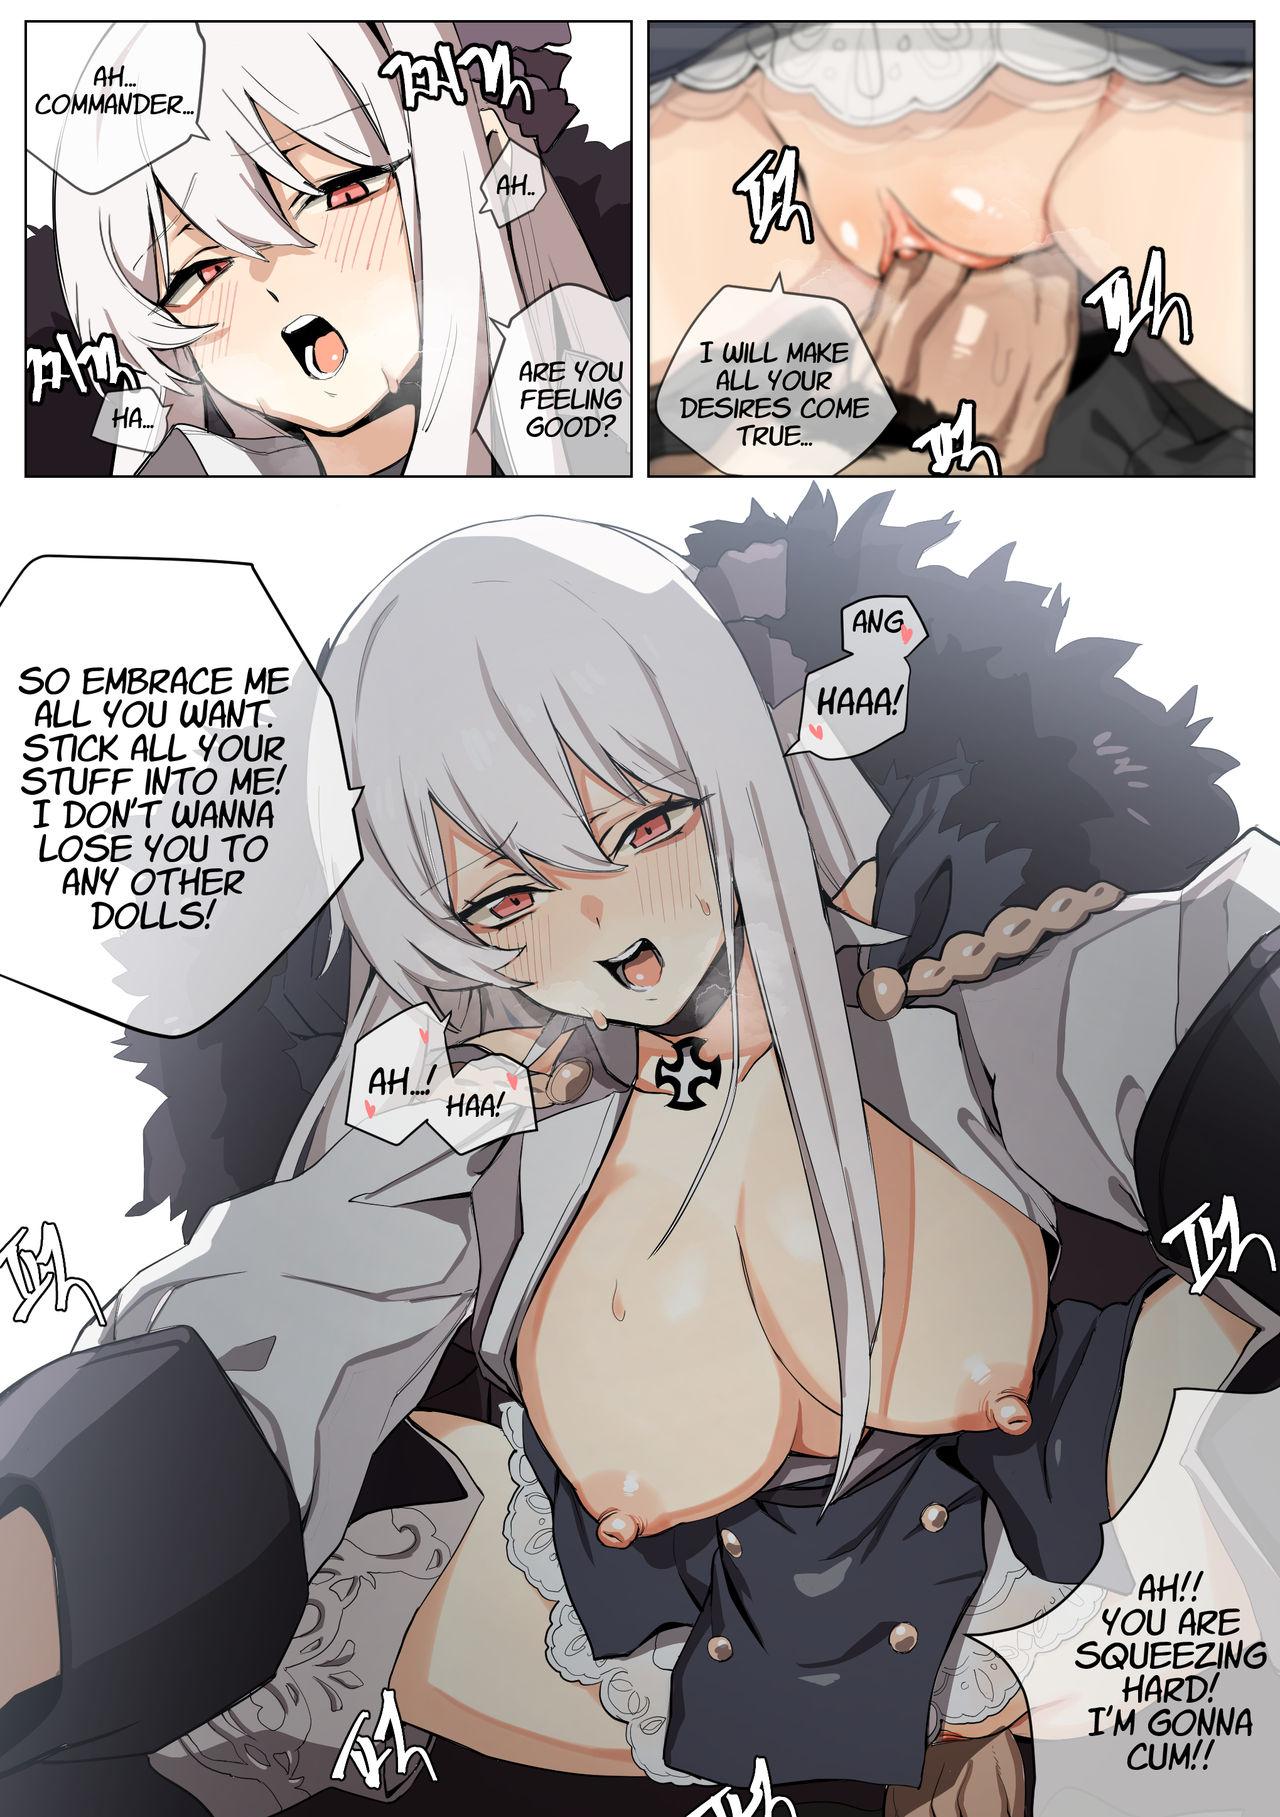 Lesbos Hobby - Girls frontline Hotporn - Page 15